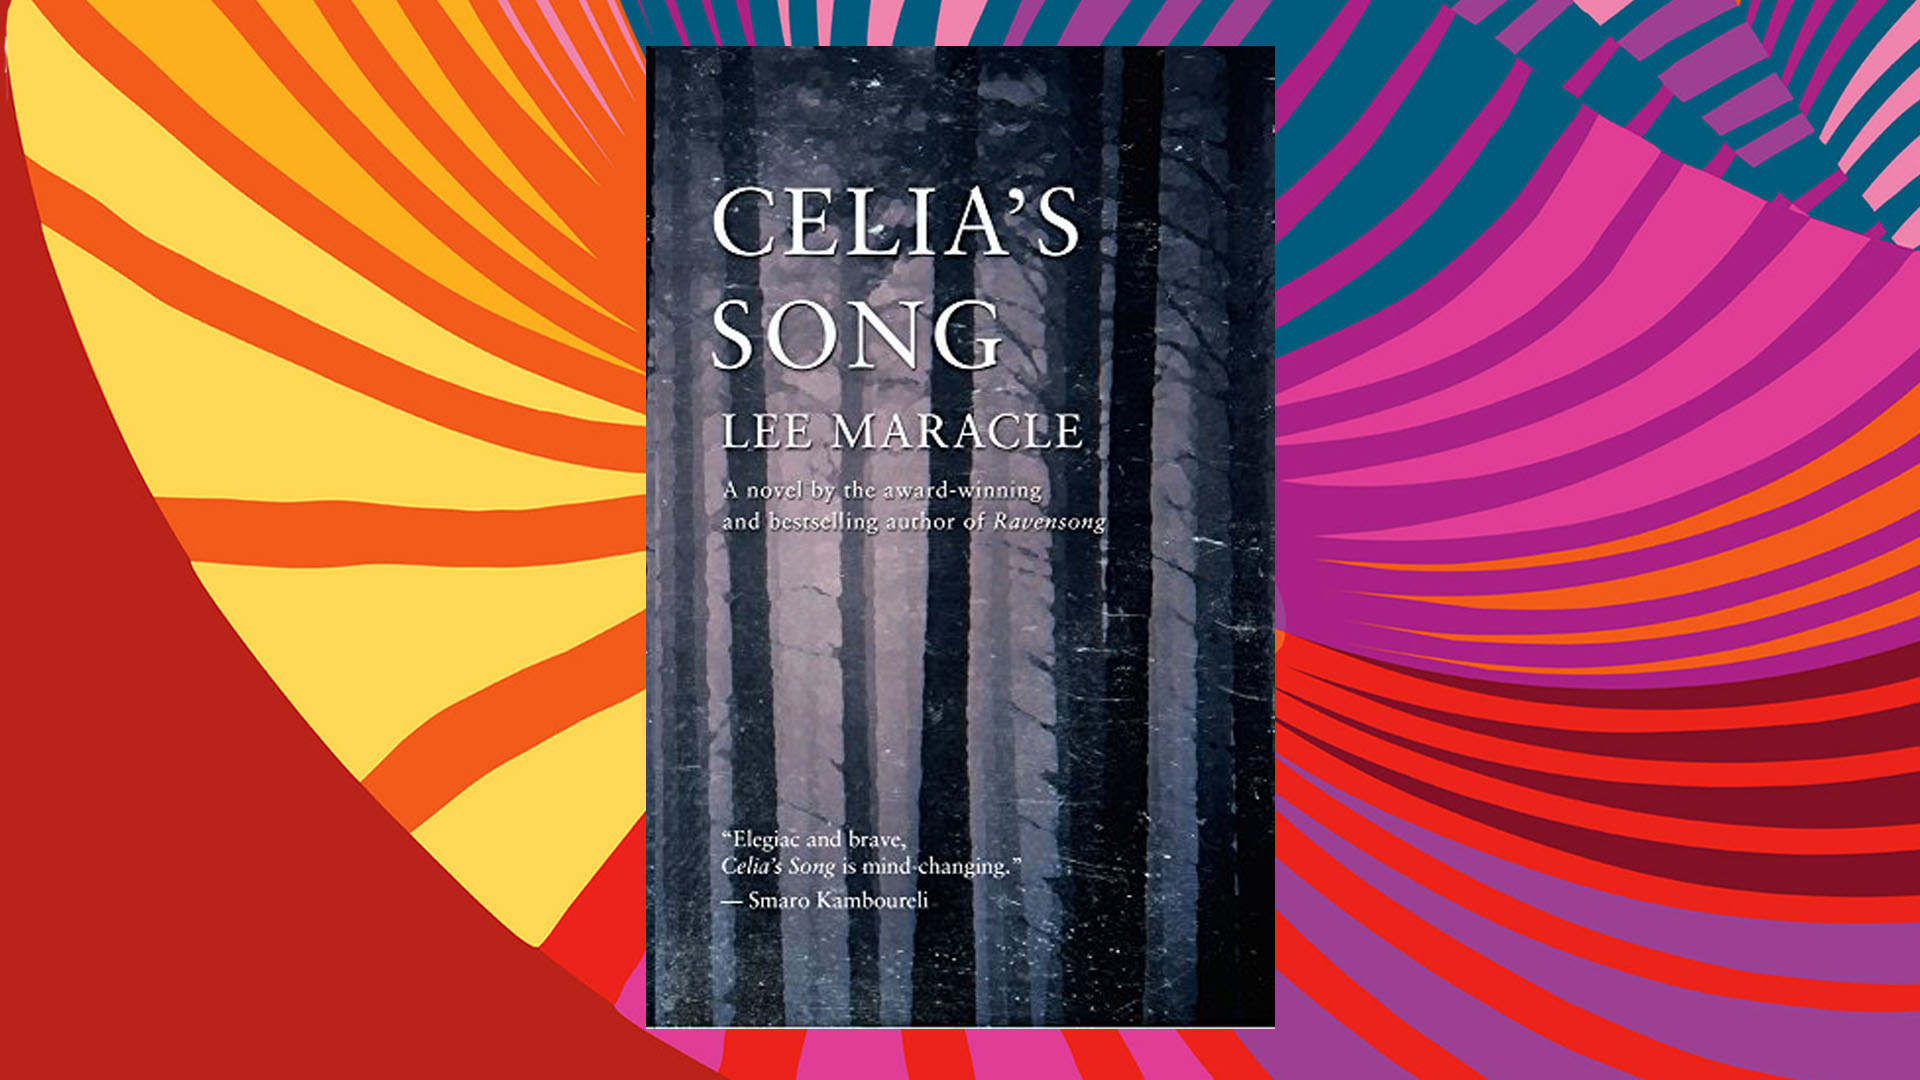 Lee Maracle’s Celia’s Song book cover on a multi-coloured background